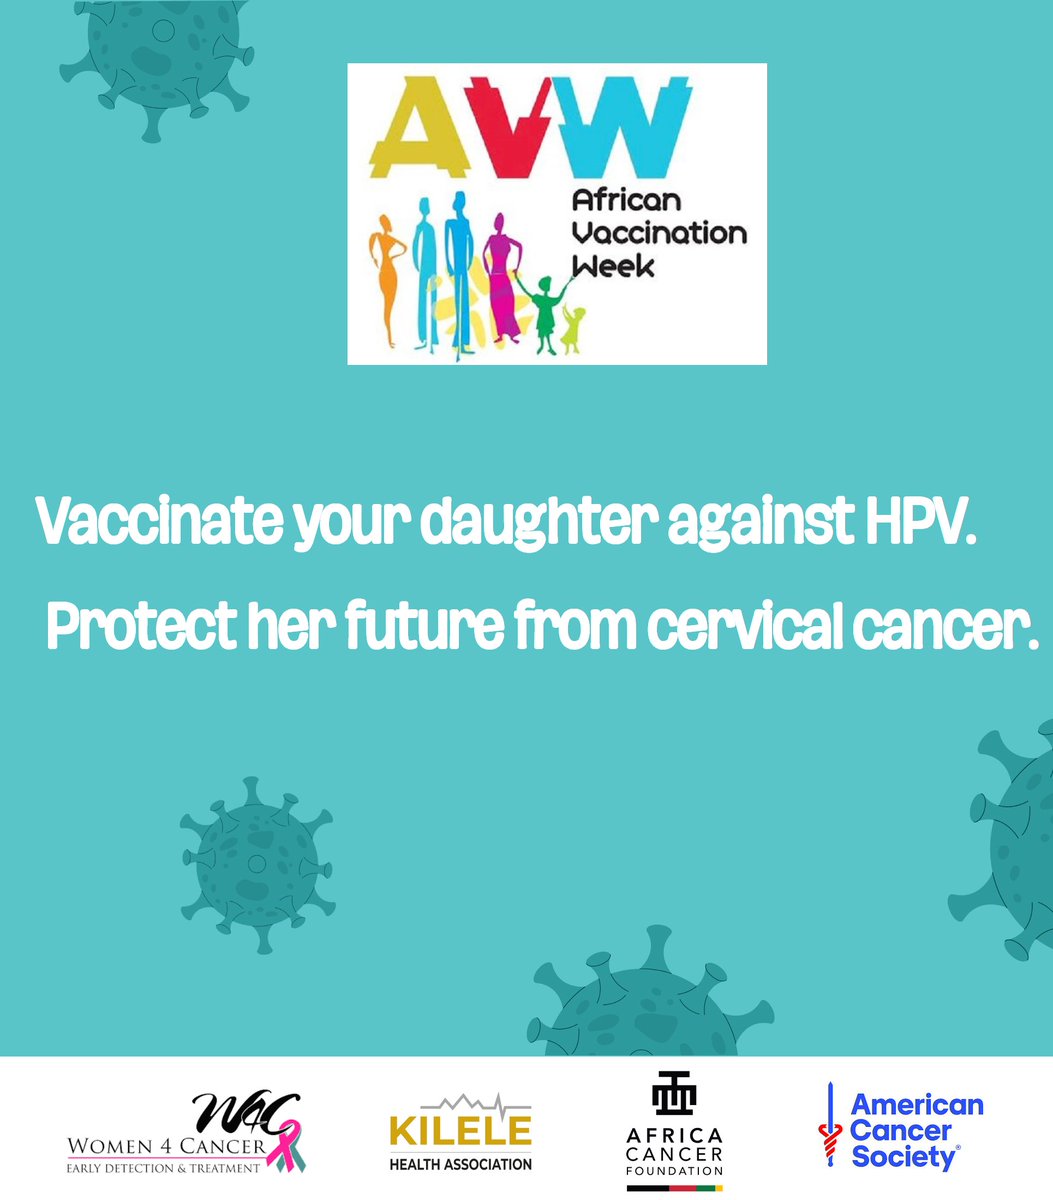 It's African Vaccination Week! #CervicalCancer, caused by HPV, is an urgent public health problem that can be solved. By vaccinating your daughter on time, before her 15th birthday, you can protect her from most cervical cancers. Get your daughter the HPV vaccine today! #AVW2024